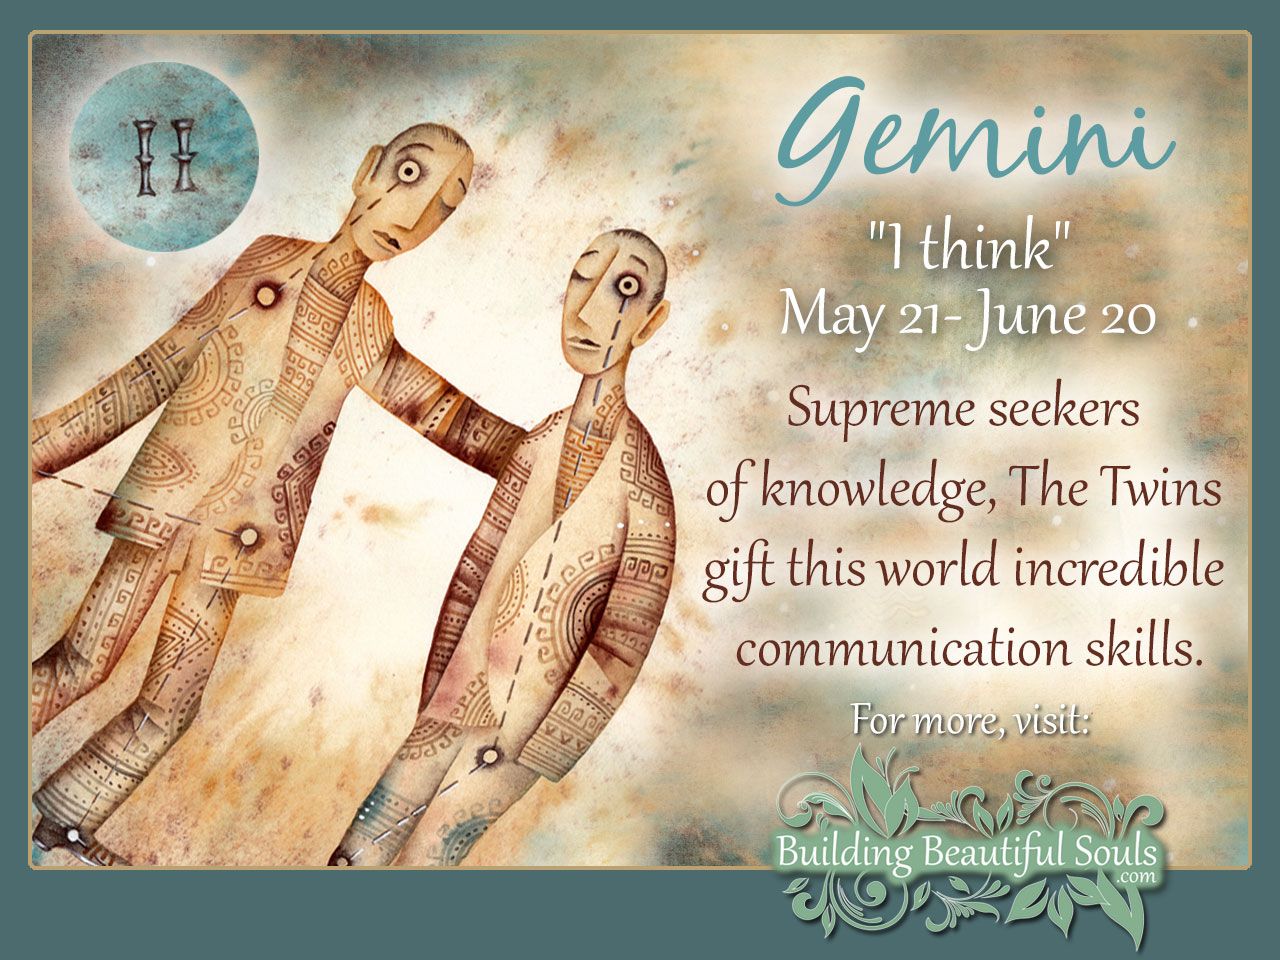 What Are The Characteristics Of A Gemini?